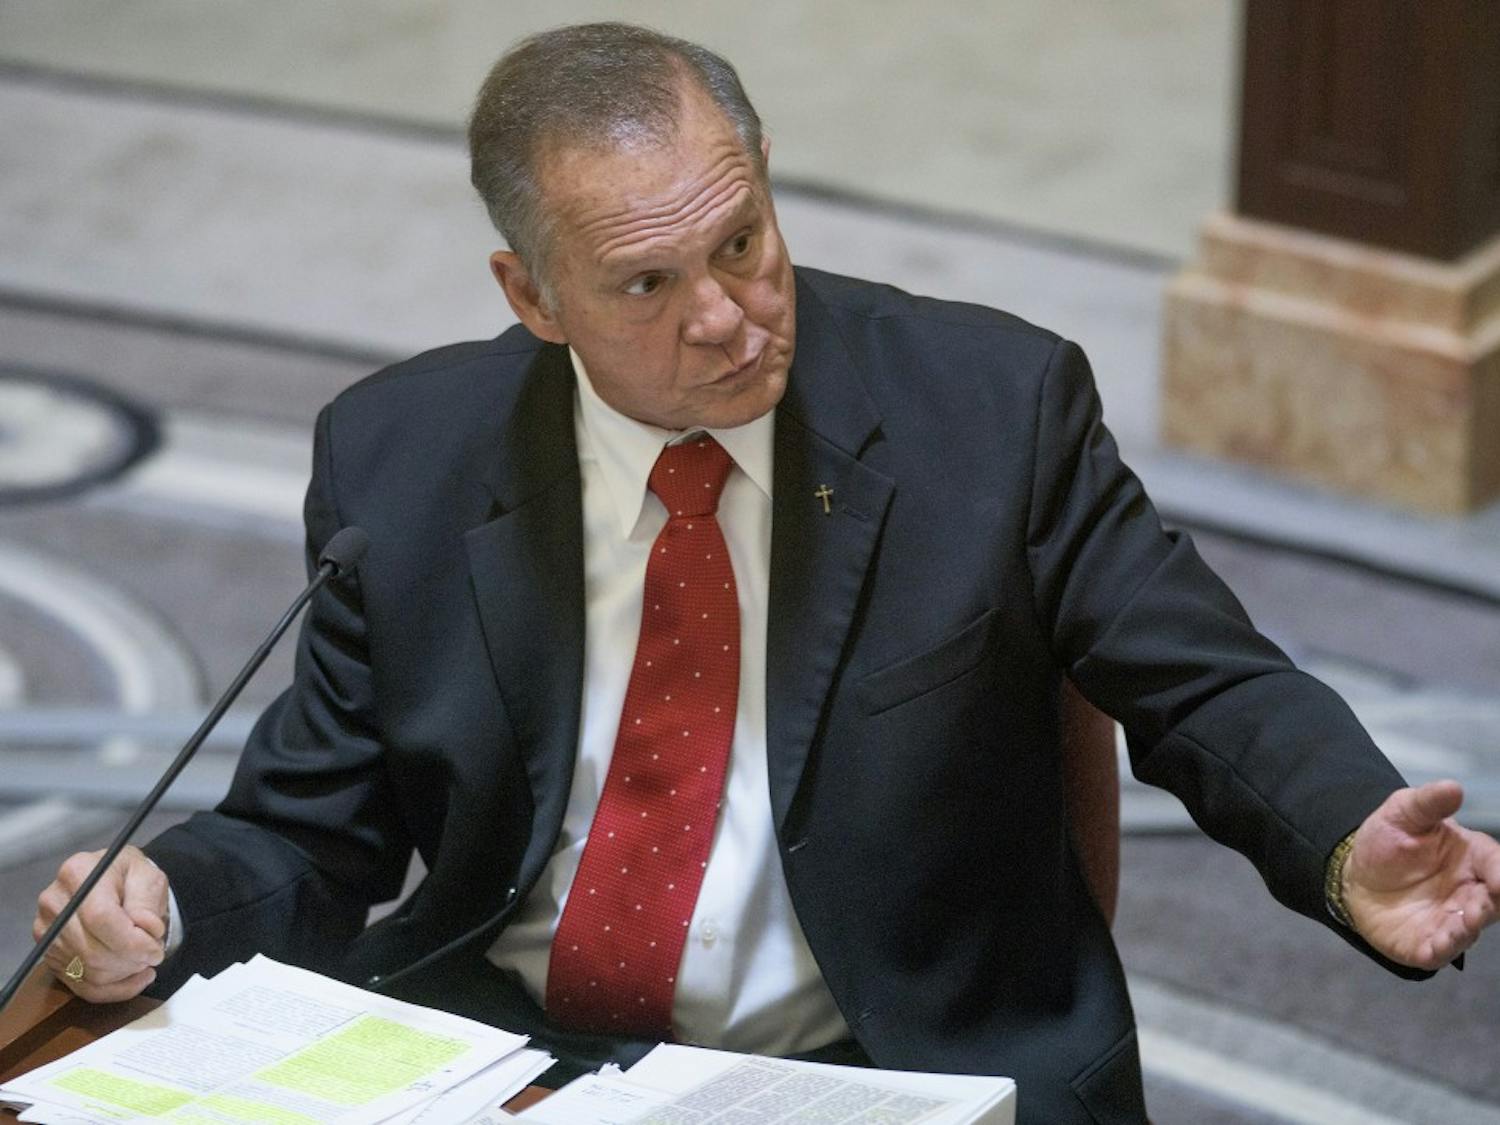 Embattled Alabama Chief Justice Roy Moore testifies during his ethics trial at the Alabama Court of the Judiciary at the Alabama Judicial Building in Montgomery, Ala., on Wednesday September 28, 2016.